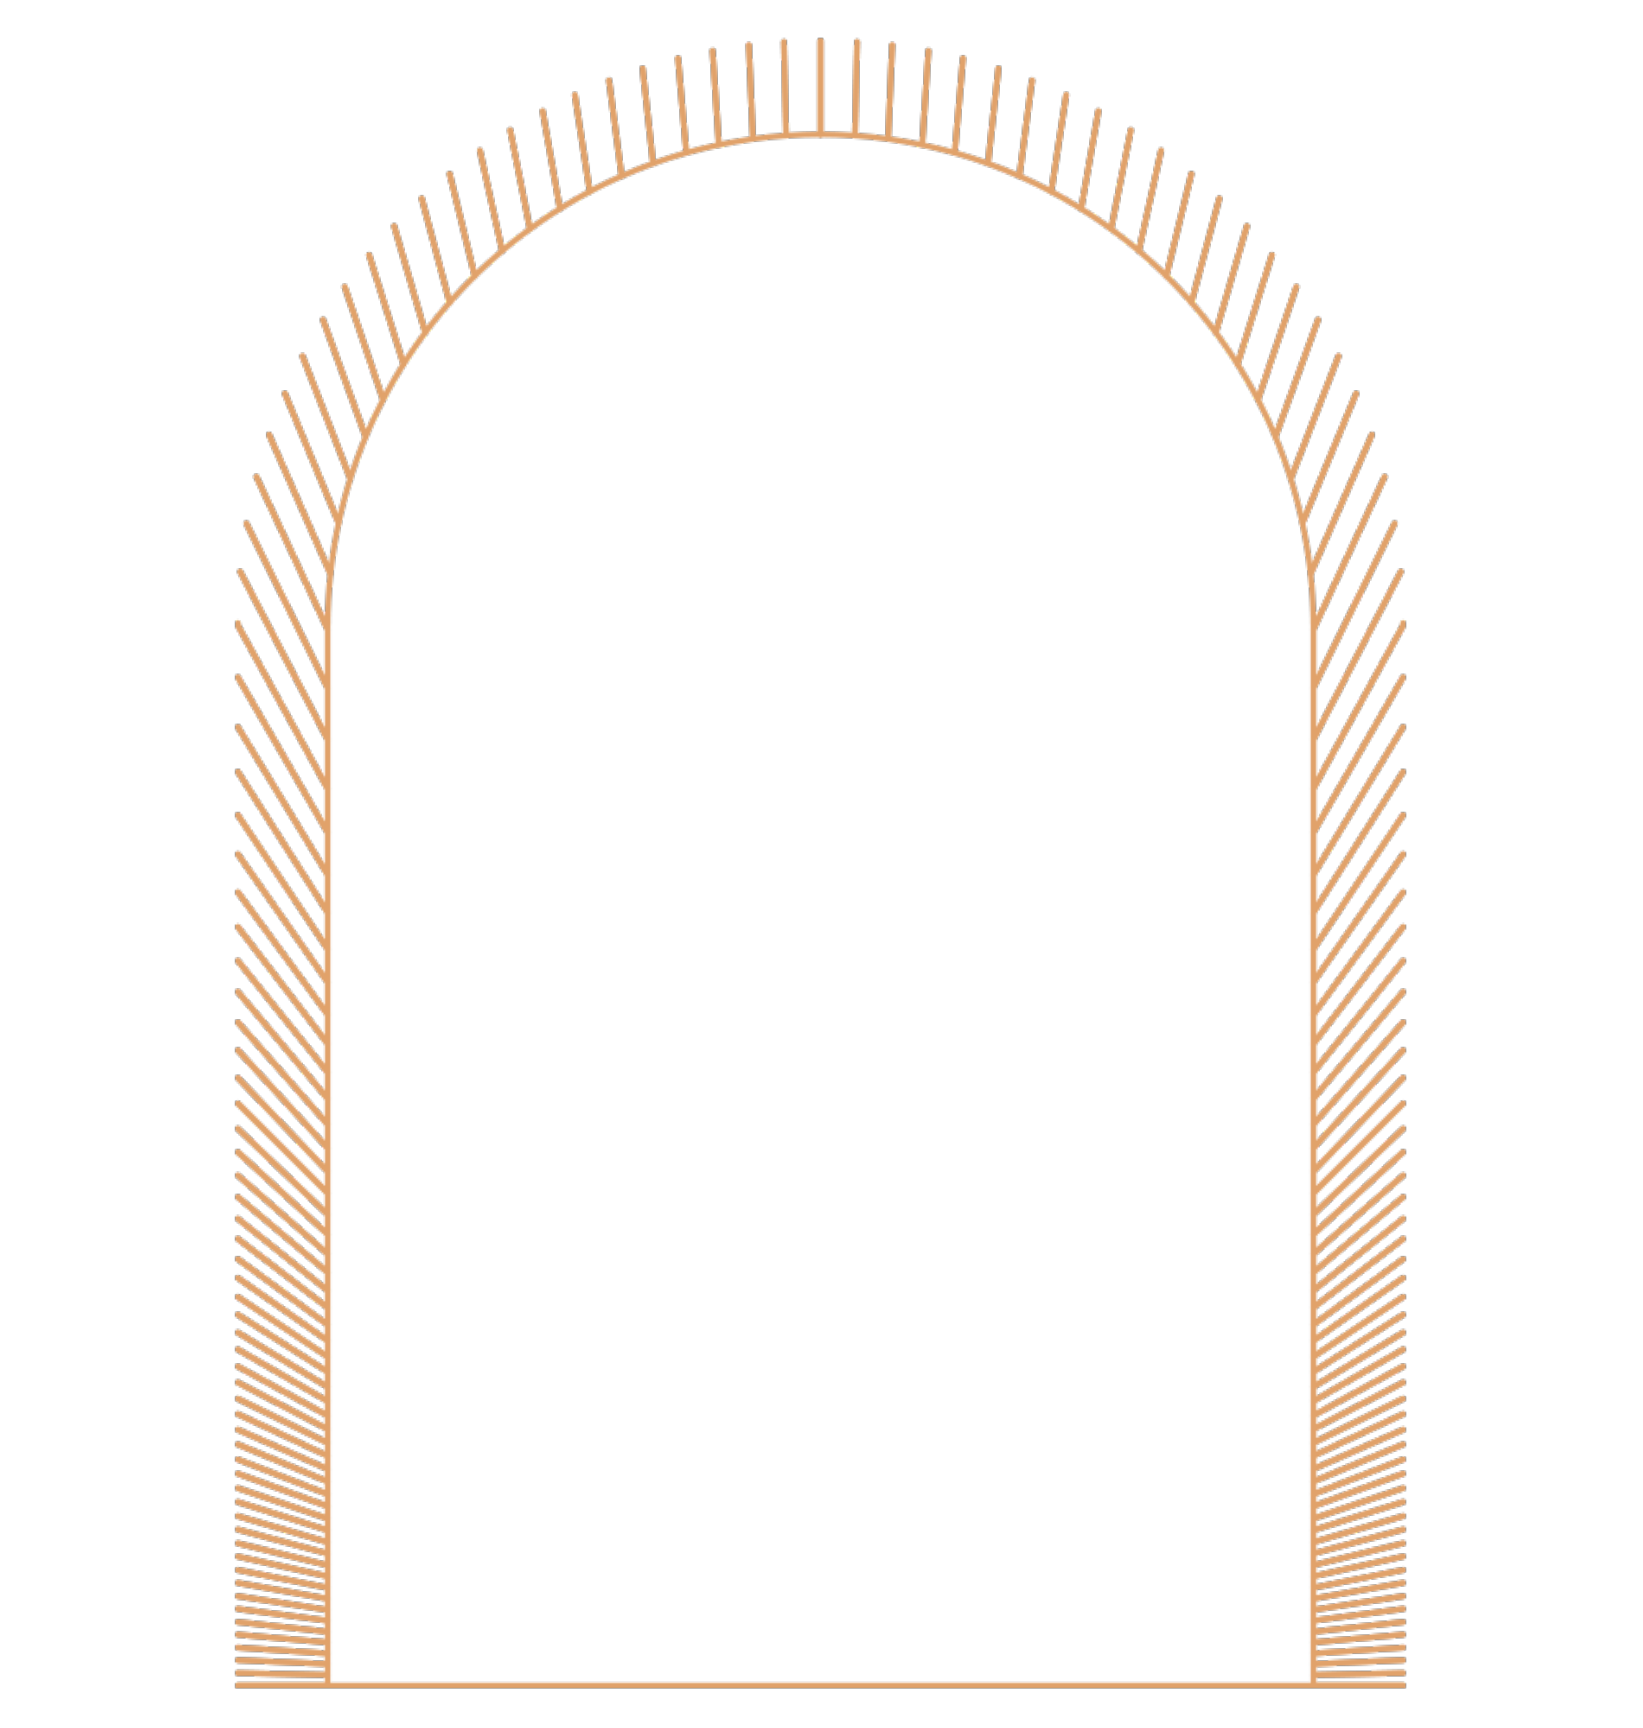 An abstract gate type shape in light brown color